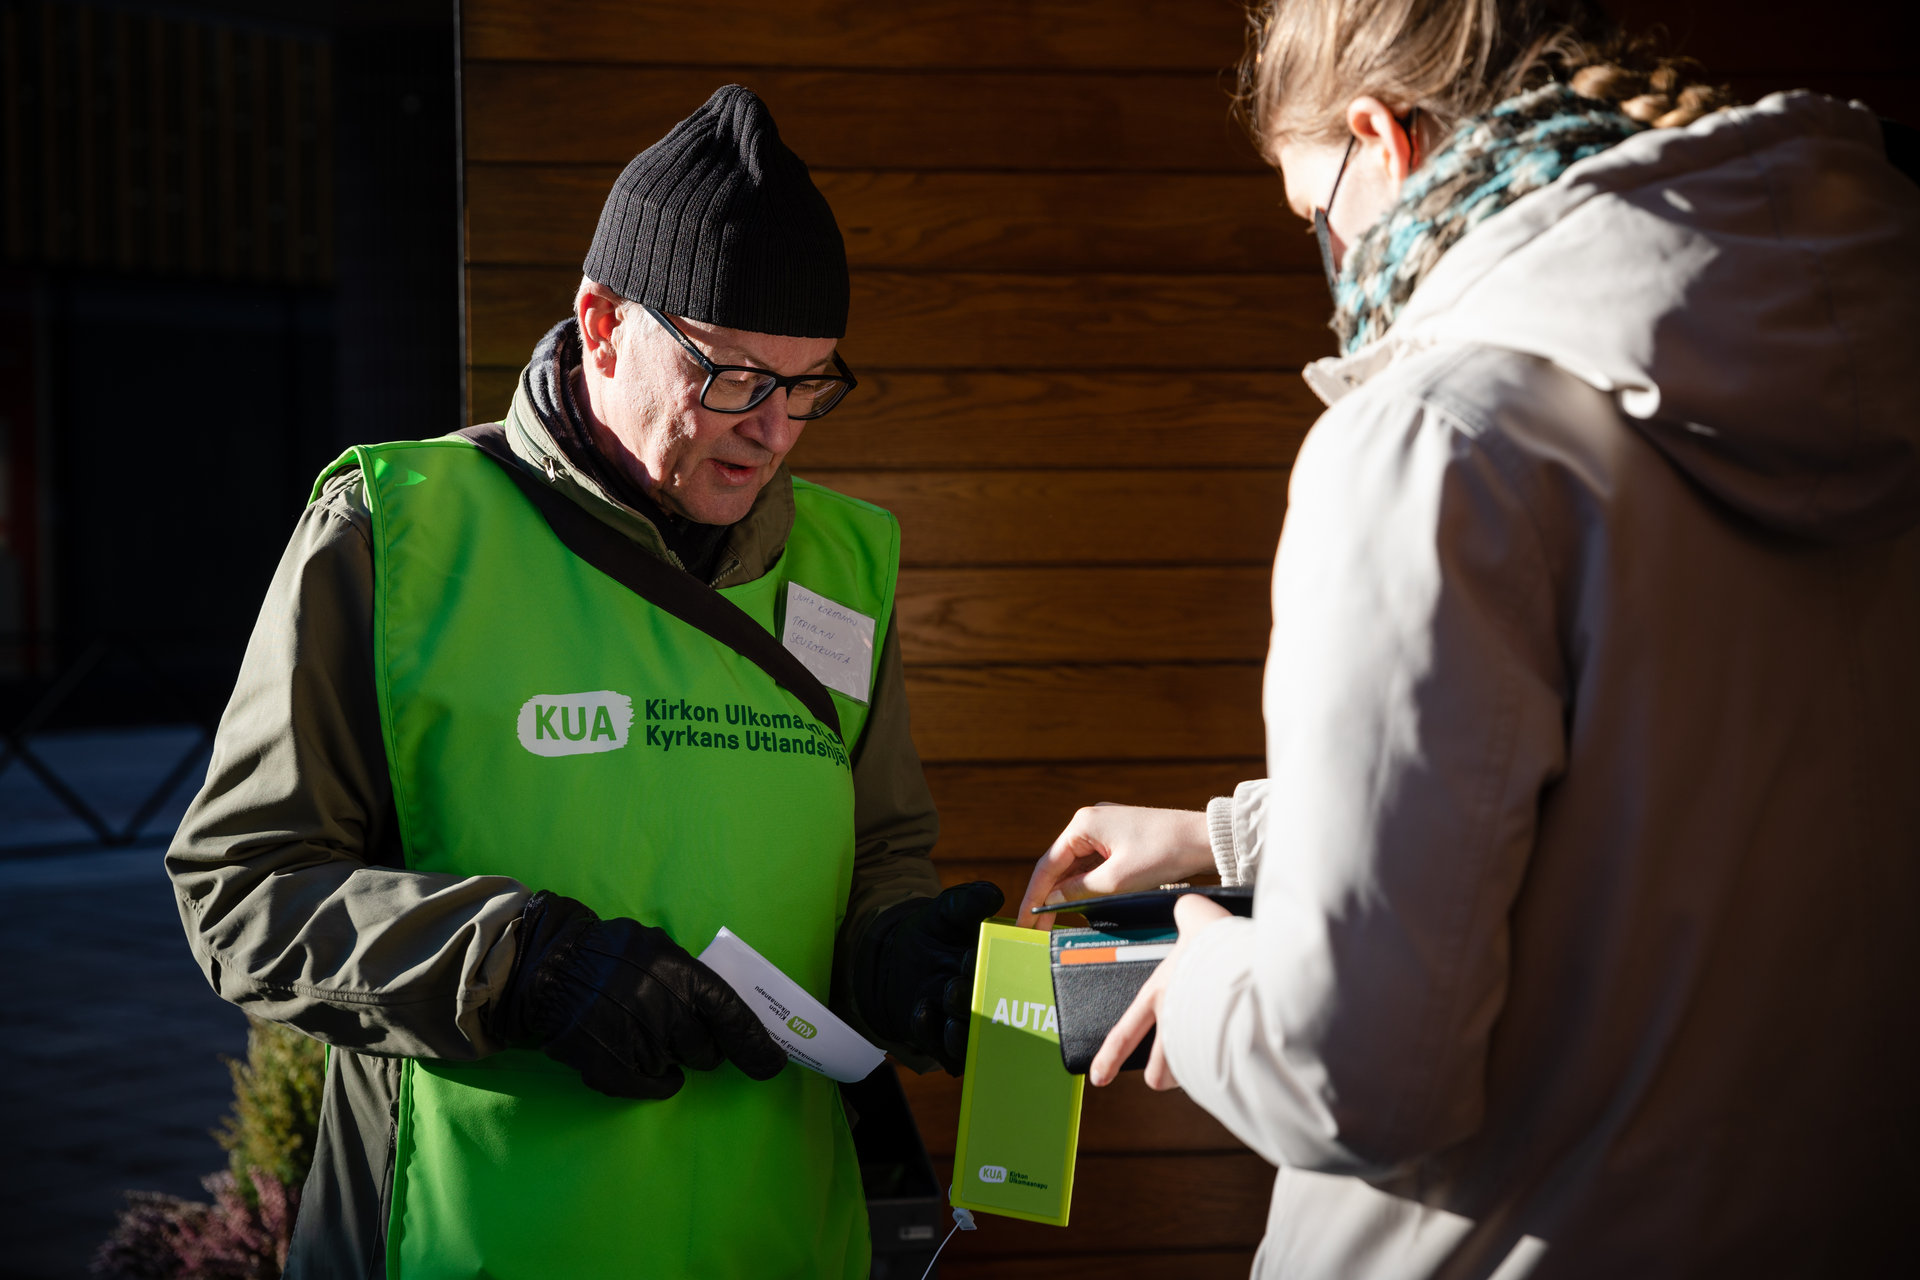 A man in a KUA green vest is collecting money in a box outside in the street. A person is contributing to the collection.